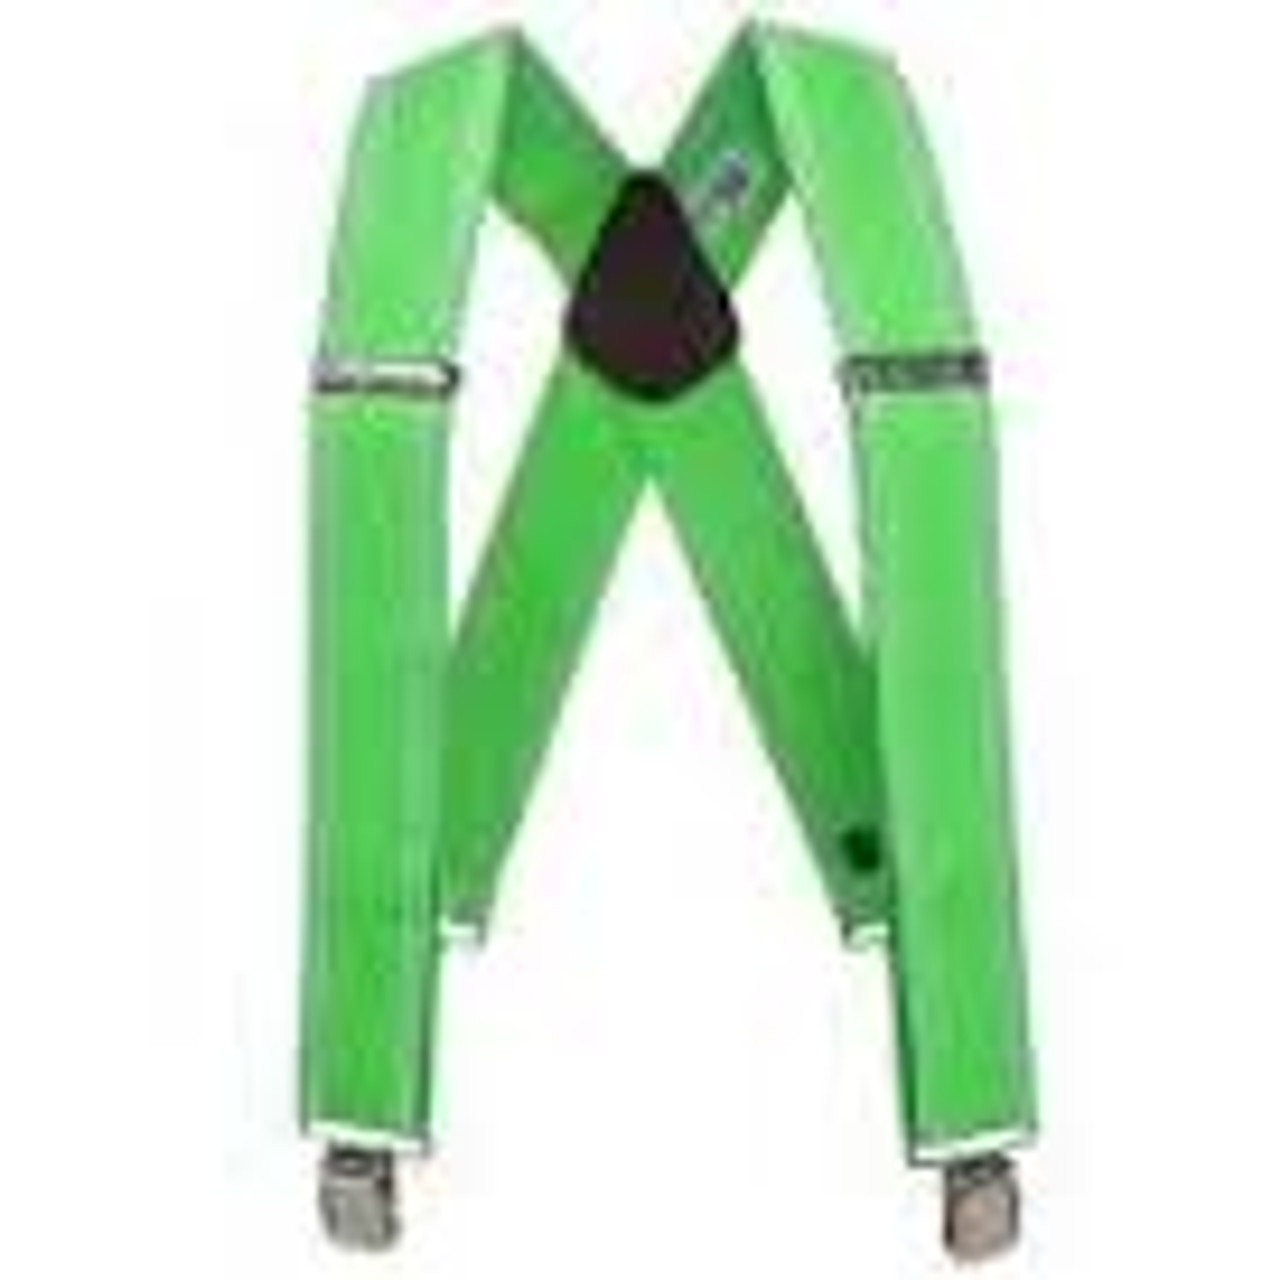 Carhartt Rugged Flex High Visibility Suspenders - Bright Lime